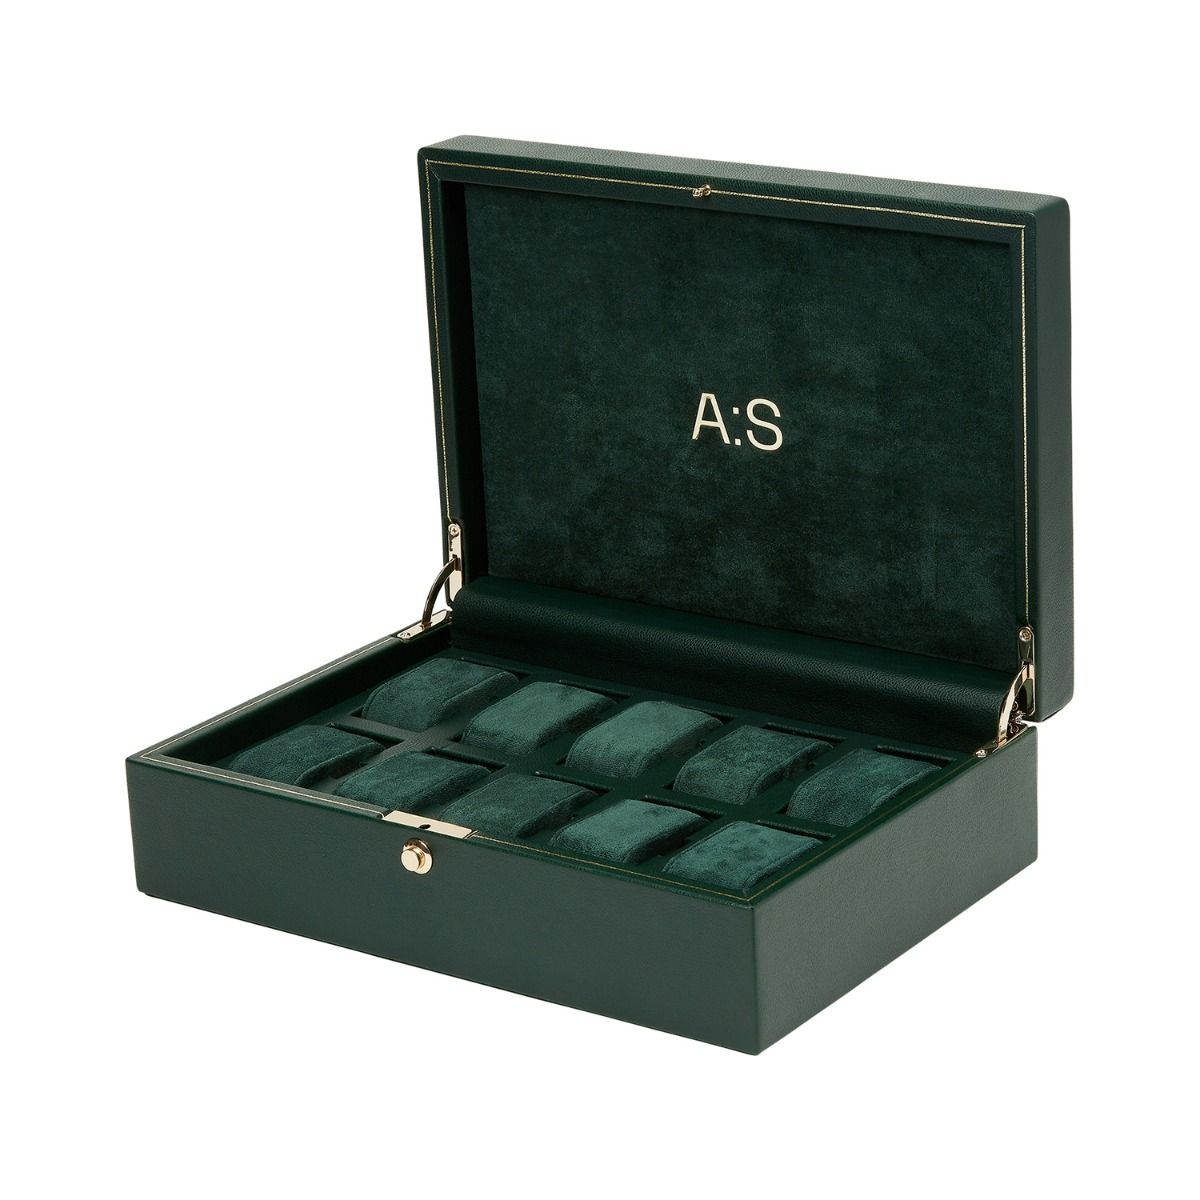 Analog / Shift Vintage Collection 10 Piece Watch Box